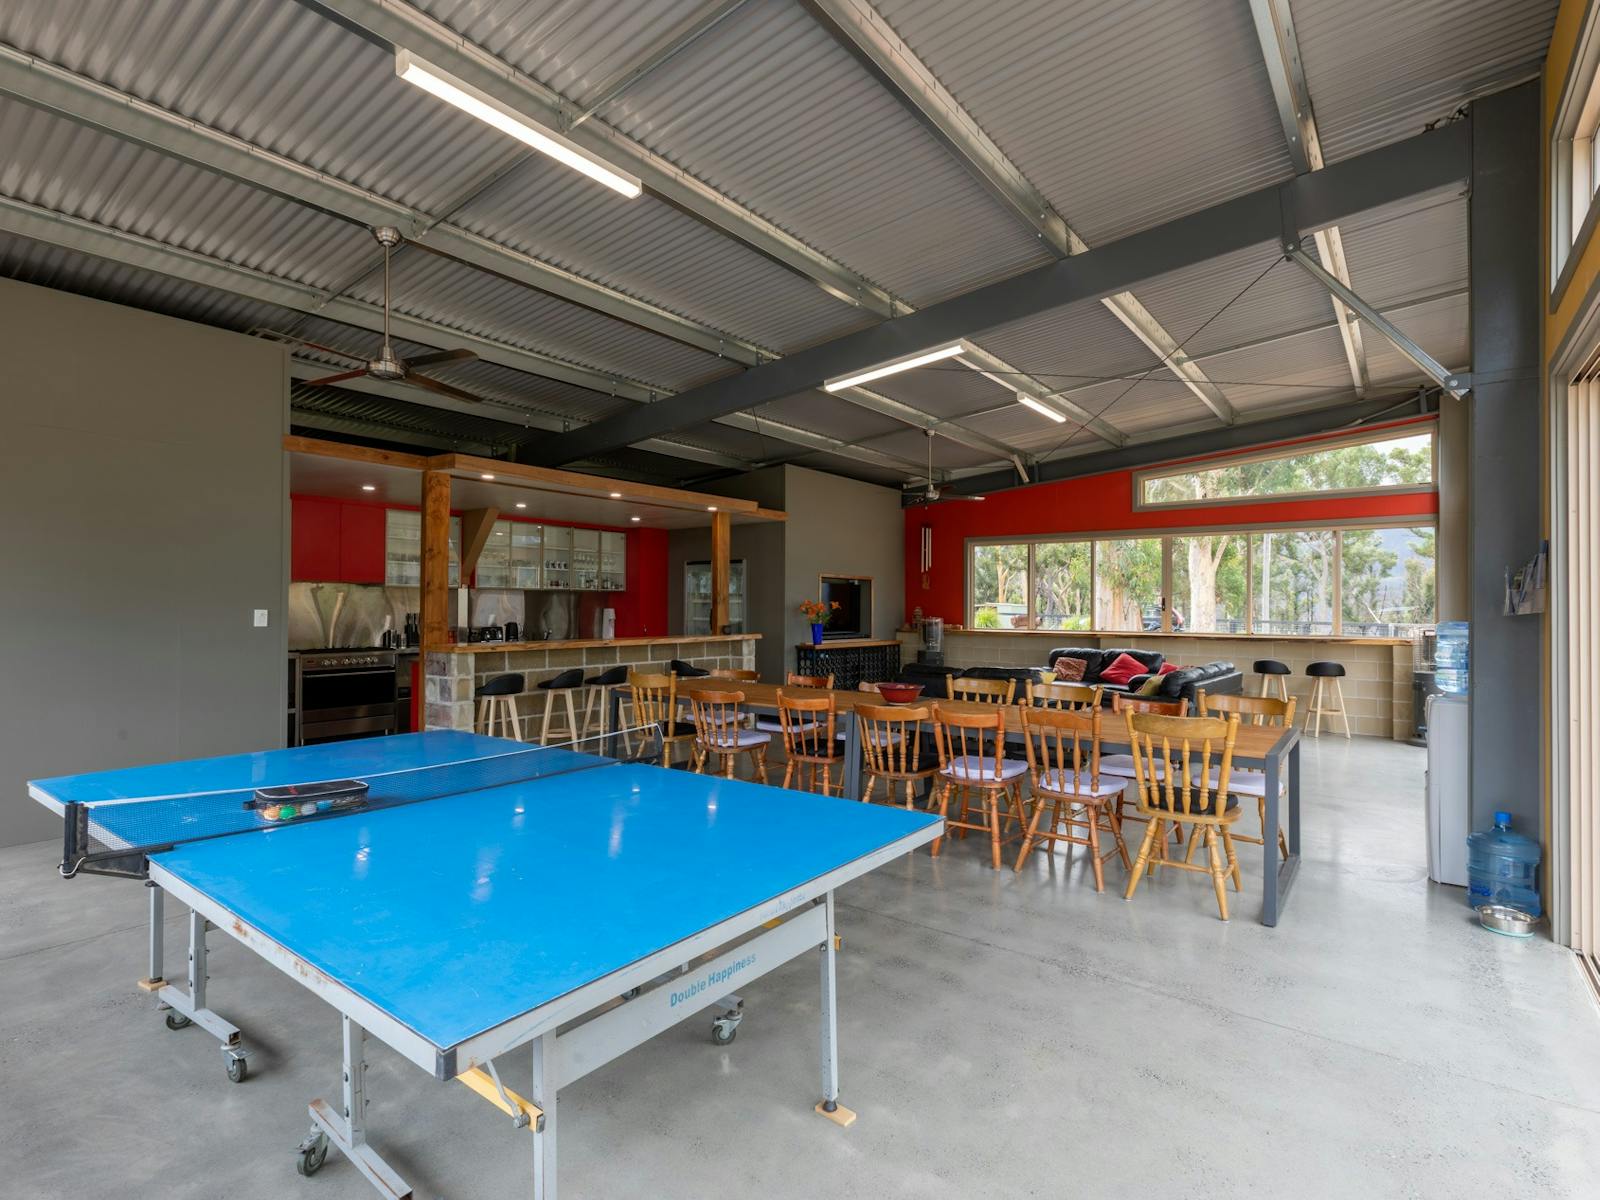 The Roo Bar offers a commercial size kitchen, lounge & Smart TV and Table Tennis area!